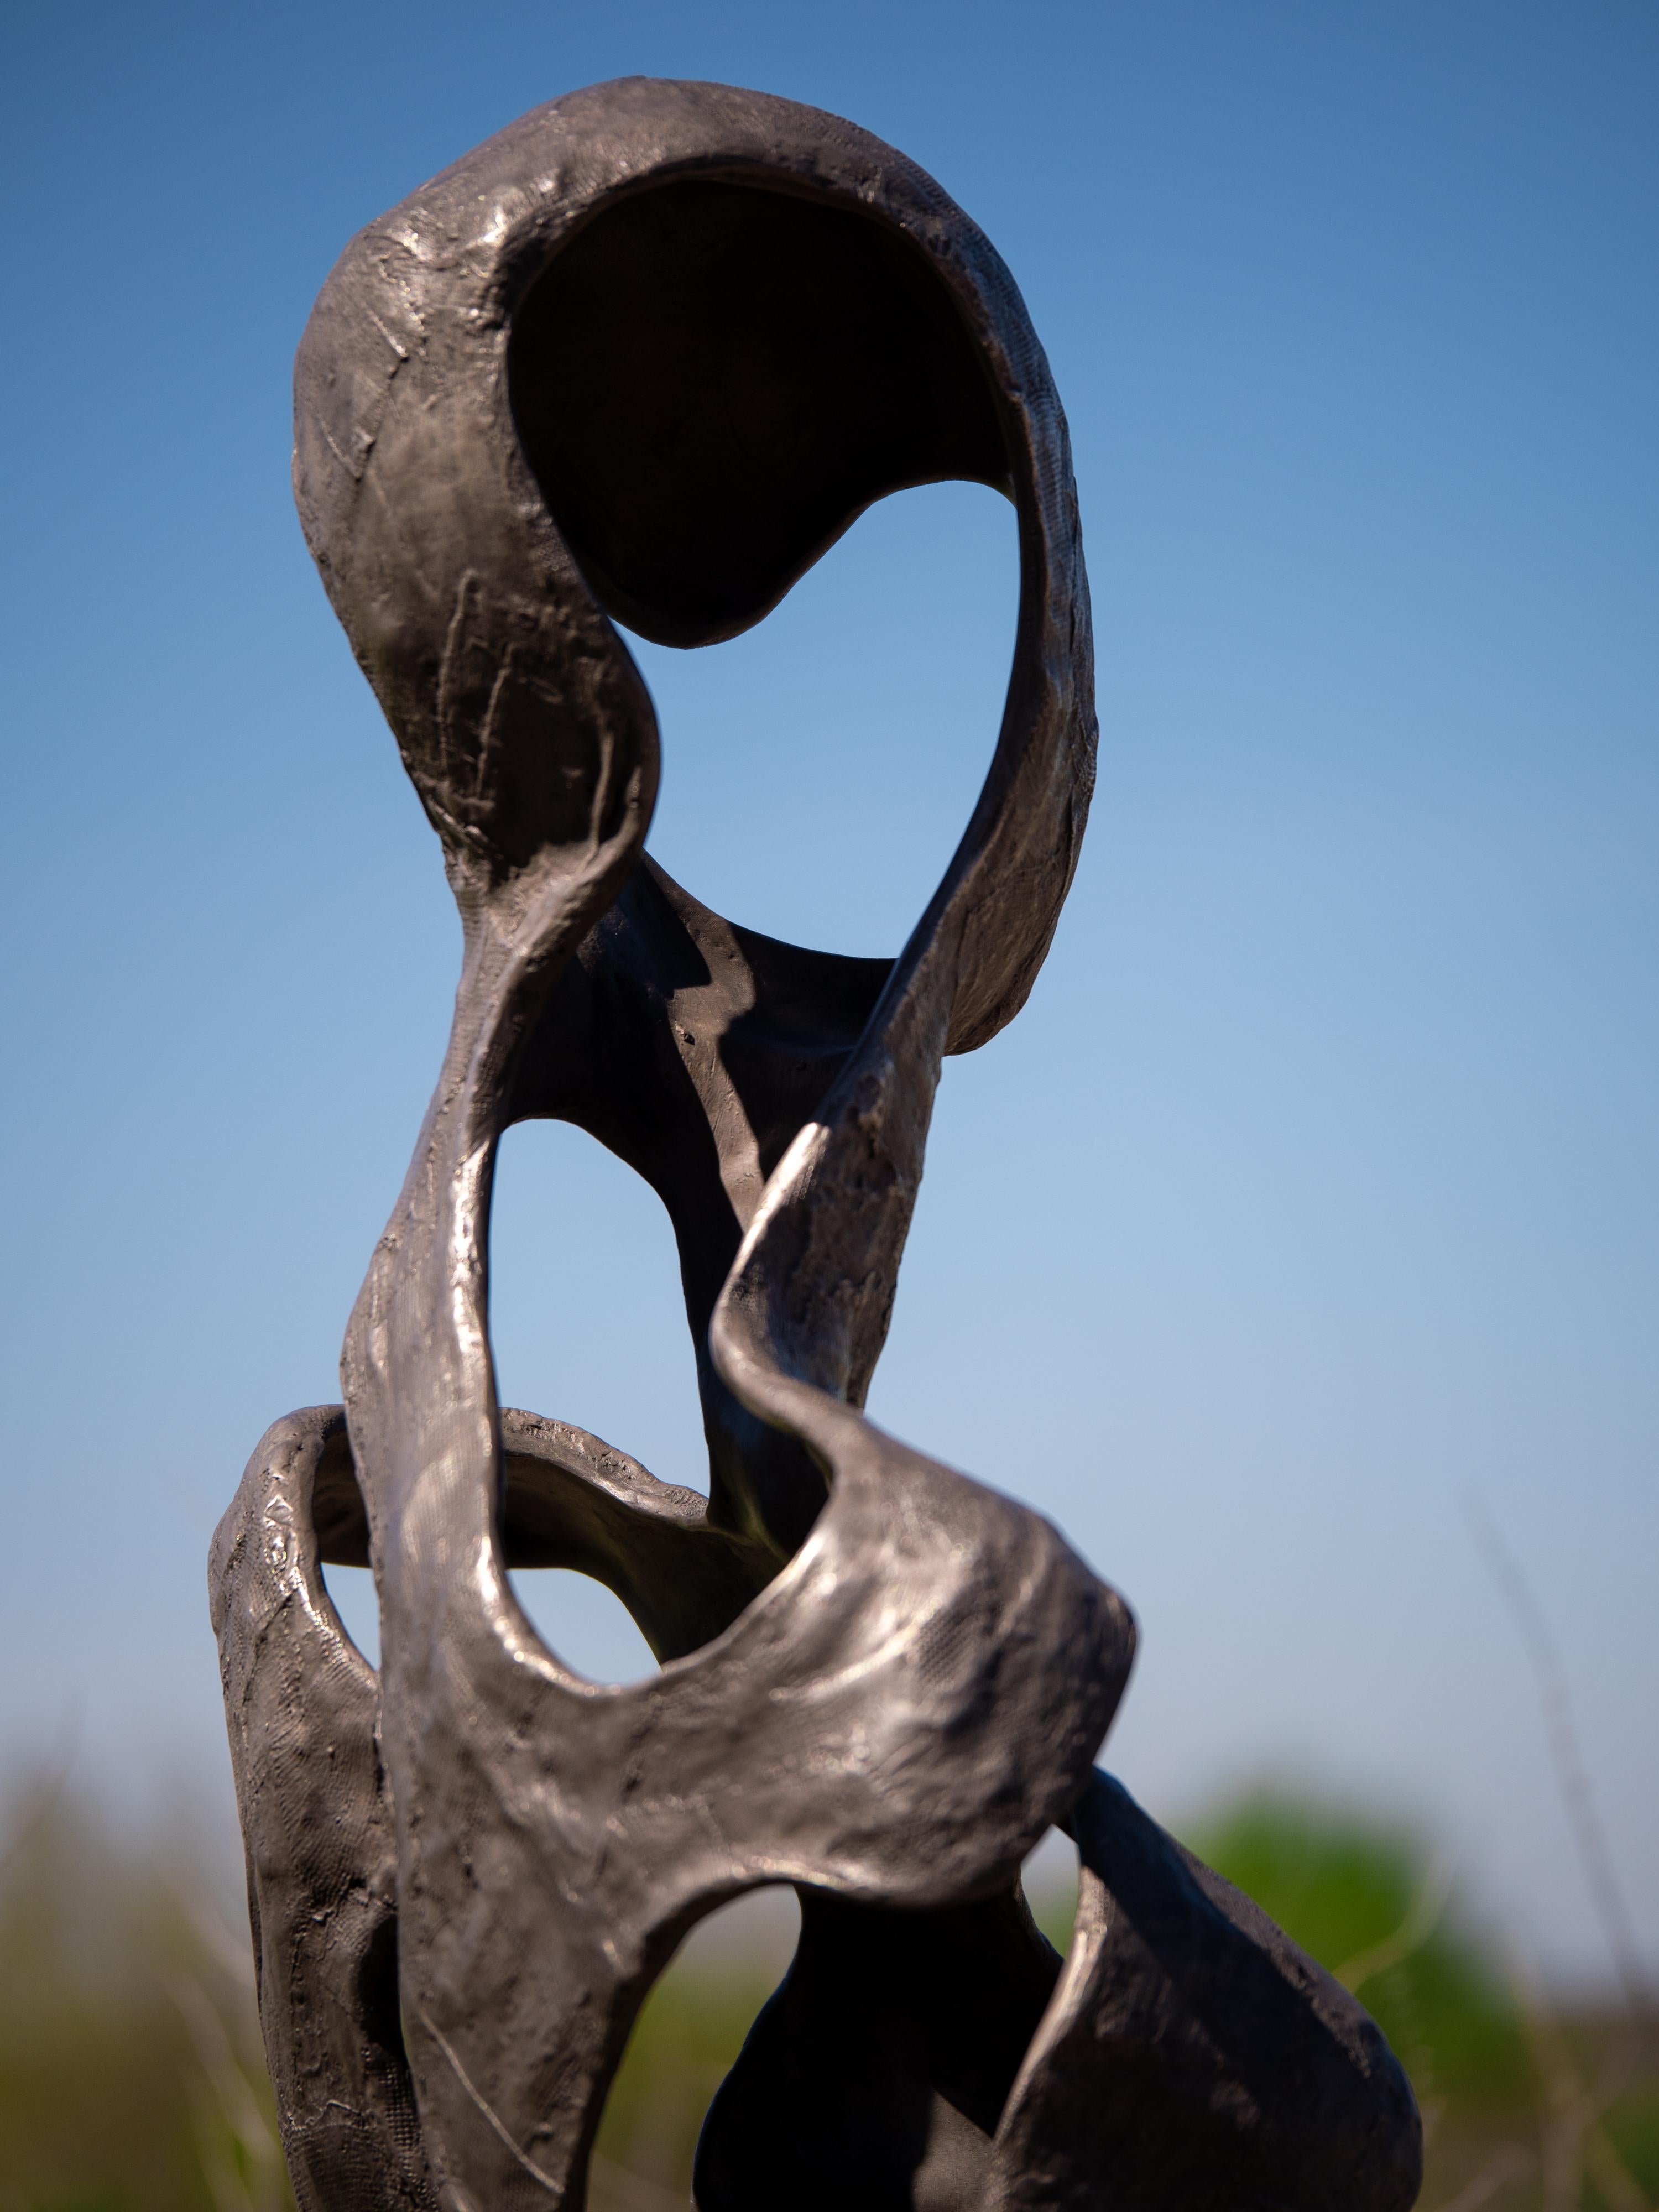 V_N_S Edition 3/9 - tall, abstracted, figurative female bronze outdoor sculpture - Gold Figurative Sculpture by David Fisher